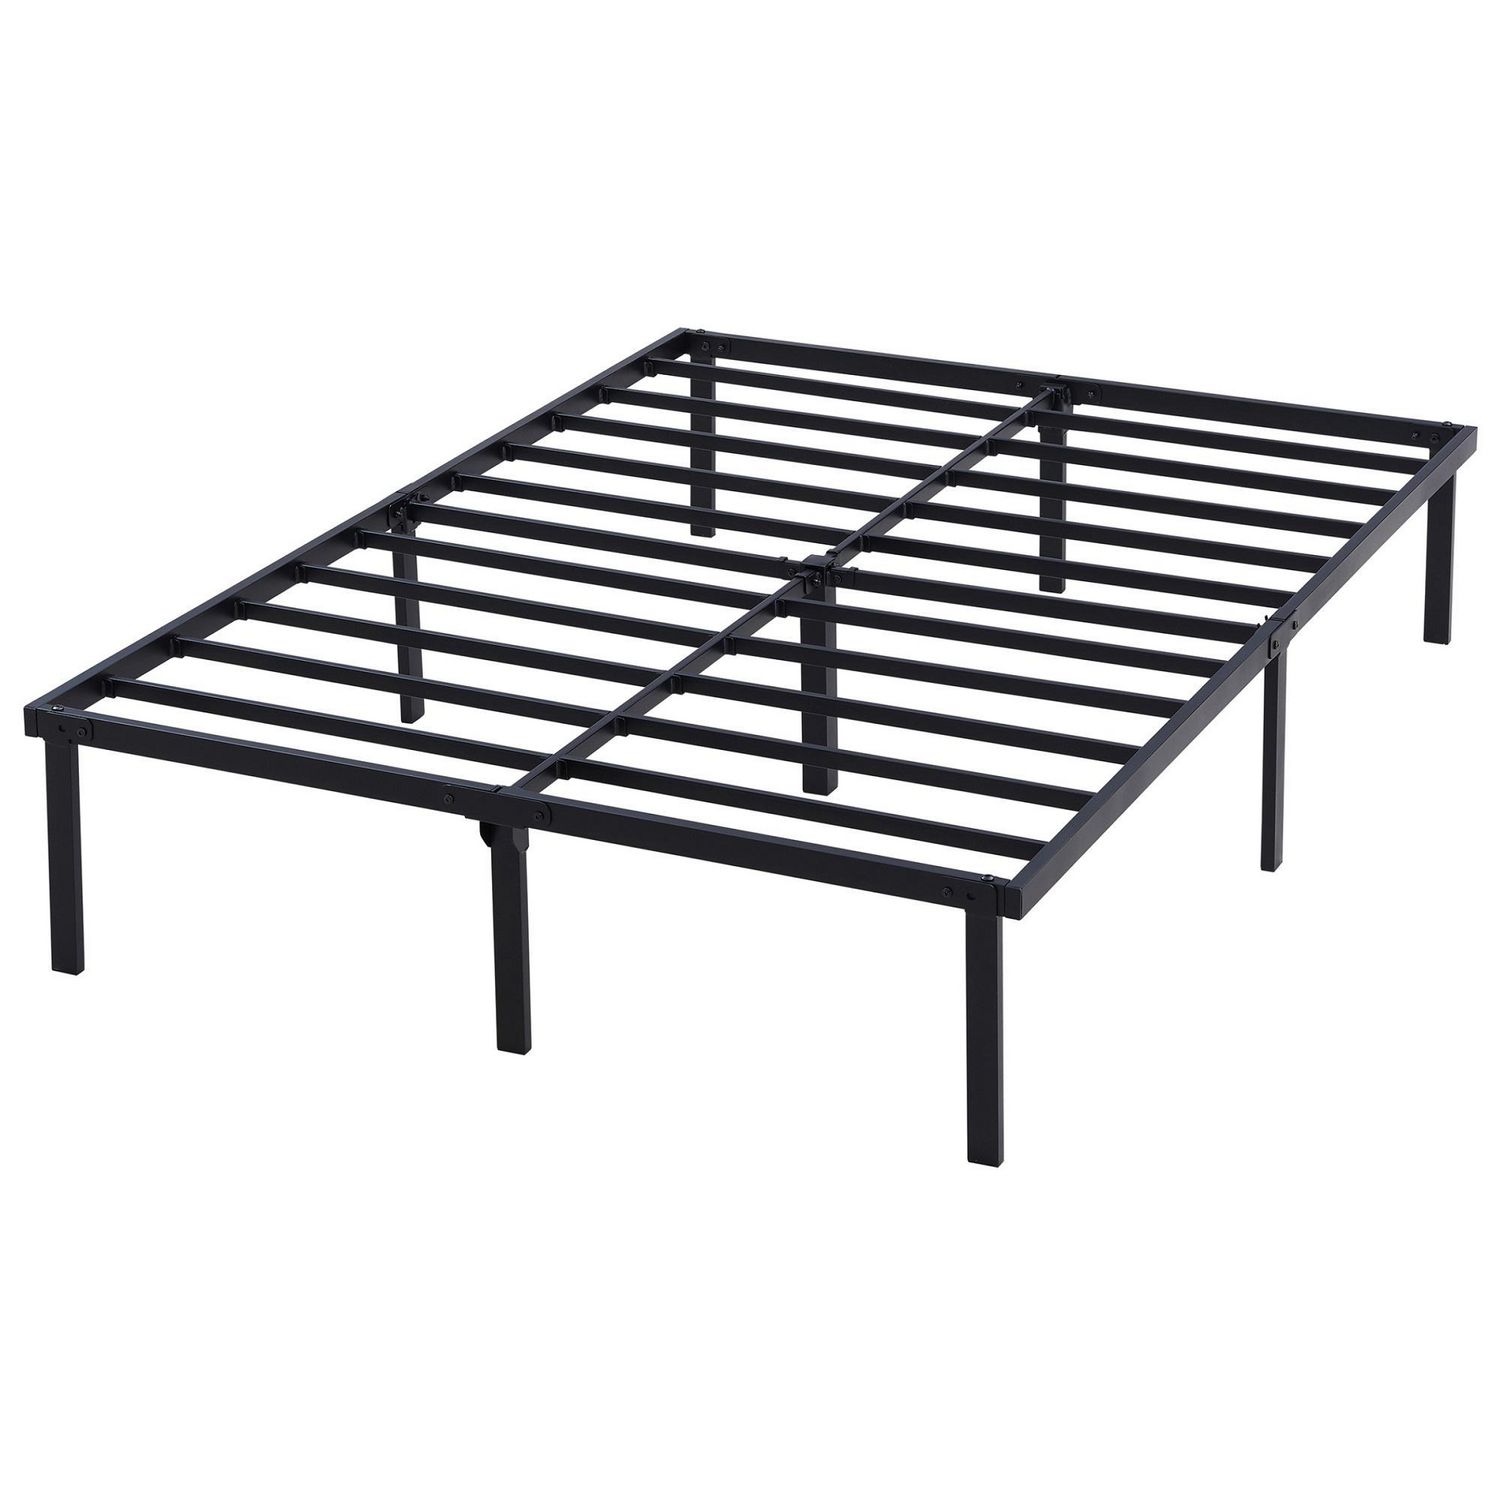 Mainstays 14 Heavy Duty Slat Bed Frame, How To Add Slats A Metal Bed Frame